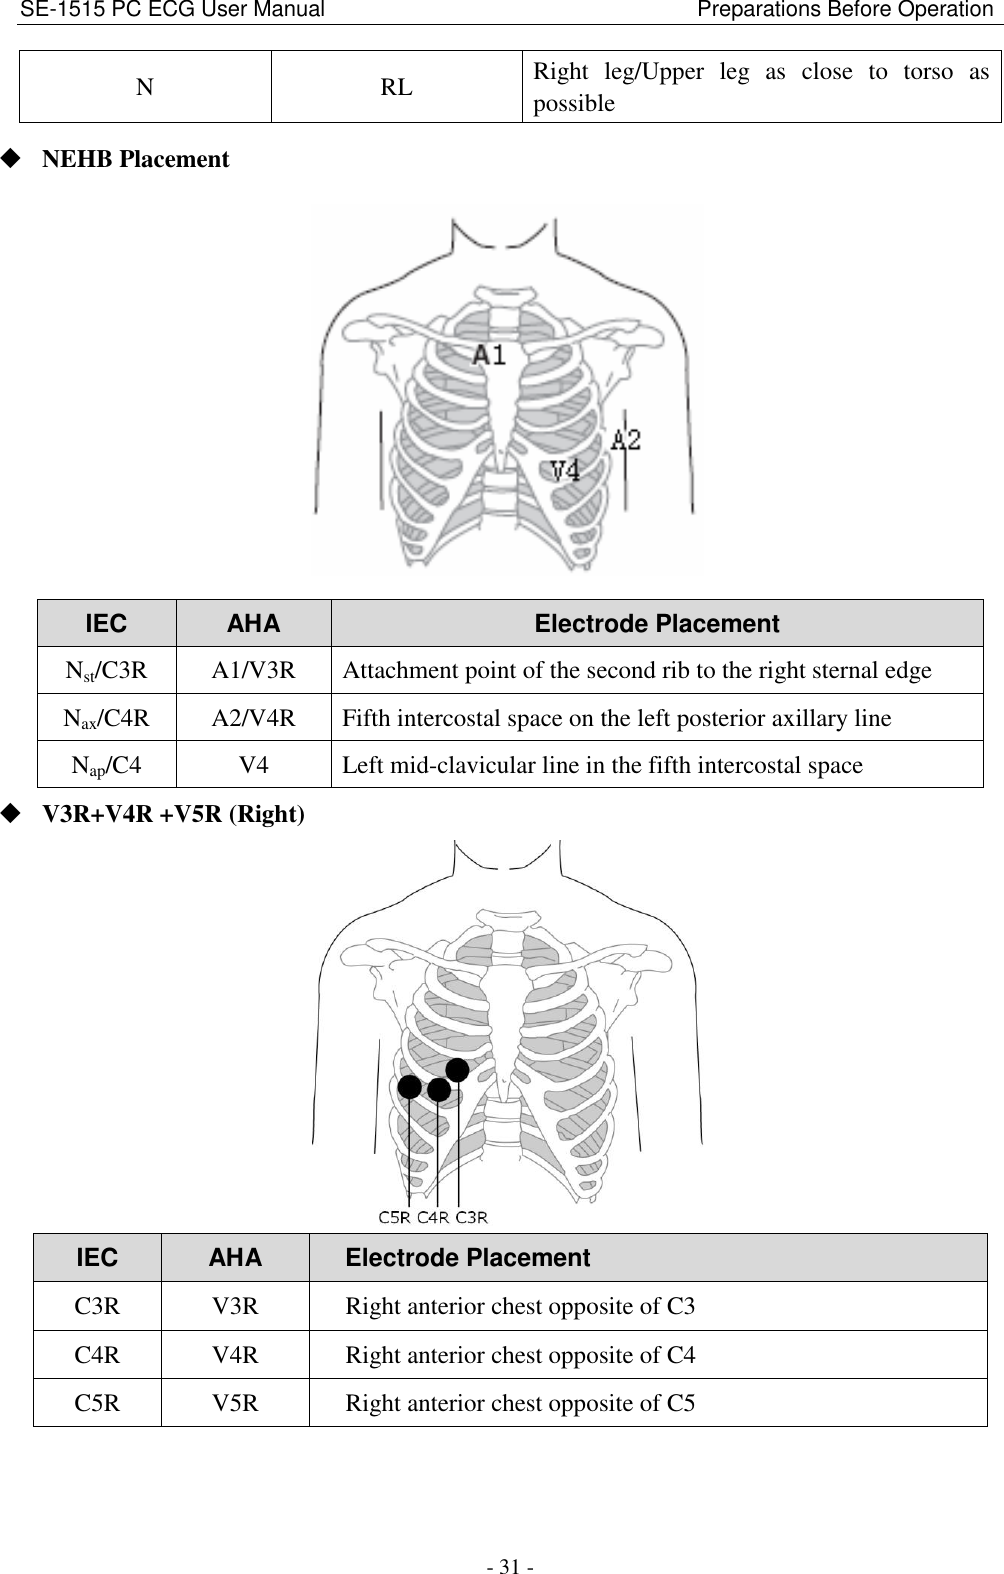 SE-1515 PC ECG User Manual                                                                    Preparations Before Operation - 31 - N RL Right  leg/Upper  leg  as  close  to  torso  as possible  NEHB Placement  IEC AHA Electrode Placement Nst/C3R A1/V3R Attachment point of the second rib to the right sternal edge Nax/C4R A2/V4R Fifth intercostal space on the left posterior axillary line Nap/C4 V4 Left mid-clavicular line in the fifth intercostal space  V3R+V4R +V5R (Right)  IEC AHA Electrode Placement C3R V3R Right anterior chest opposite of C3 C4R V4R Right anterior chest opposite of C4 C5R V5R Right anterior chest opposite of C5 